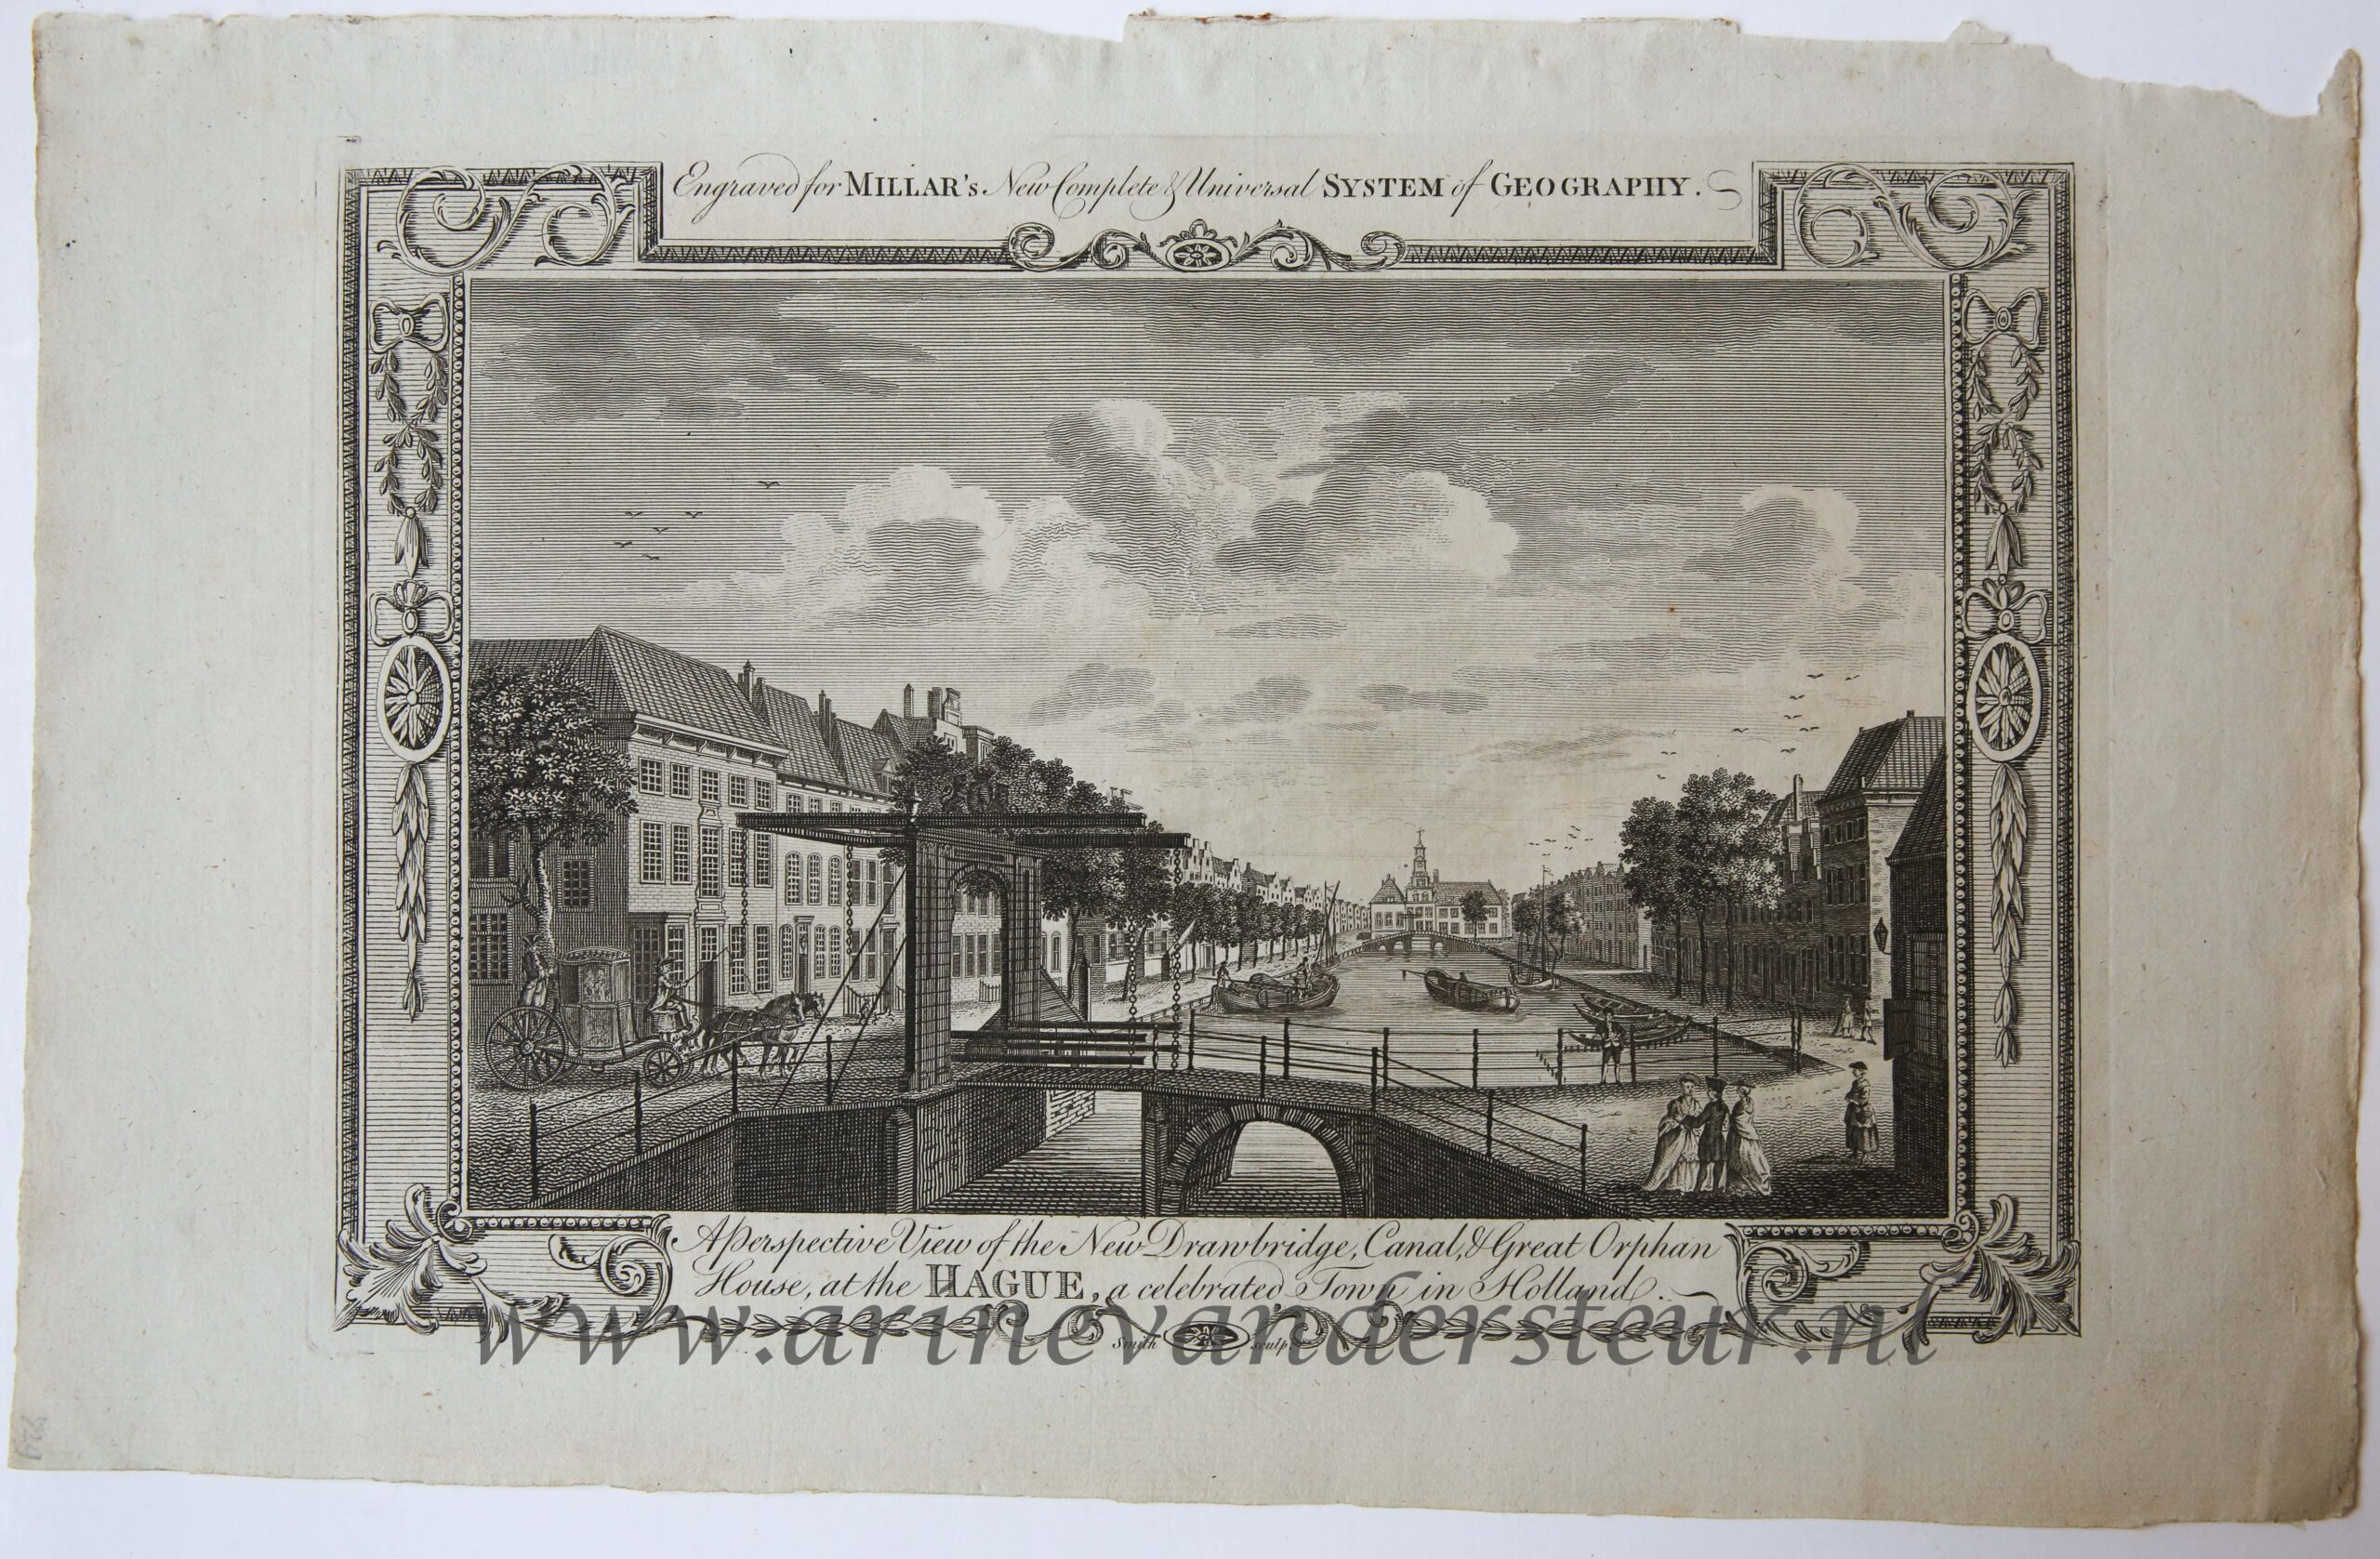 [Antique print, etching] A Perspective View of the New Drawbridge Canal and Great Orphan House at The Hague a celebrated Town in Holland (Bierkade Den Haag), published 1782.